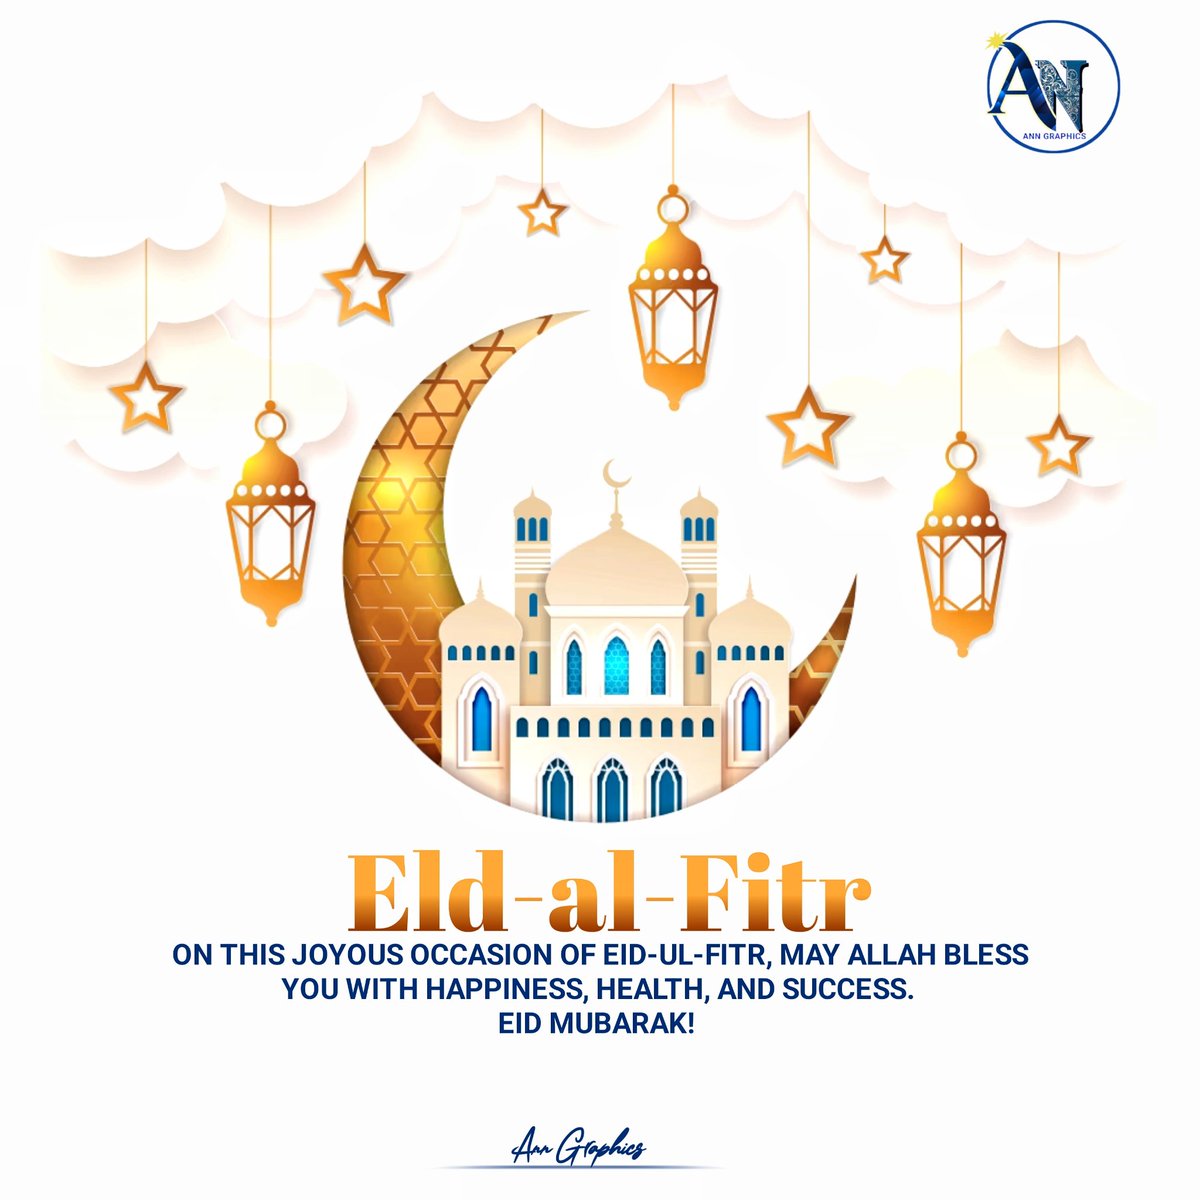 Eid Mubarak to all our Muslim brothers and sisters, on this joyous occasion of Eld-el-fitr, may Allah bless you with happiness, health and success.

EID MUBARAK!

#Eidmubarak
#Eidelfitri
#Muslimfamily
#Muslimfriends
#Muslimclients
#Felicitation
#PrincessAnn
#AnnGraphics